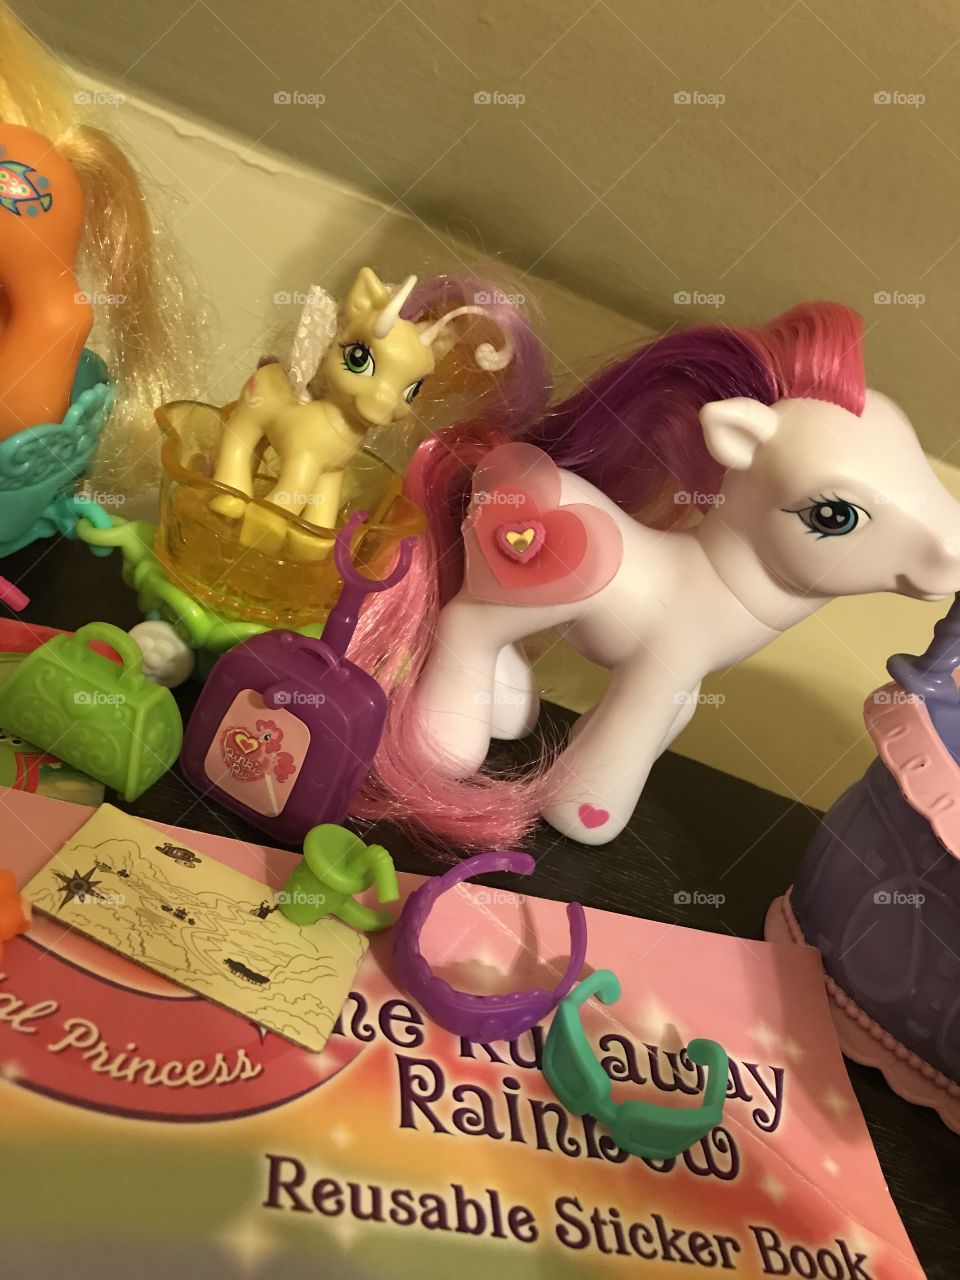 Several colorful My Little Pony toys from the 2000s to current